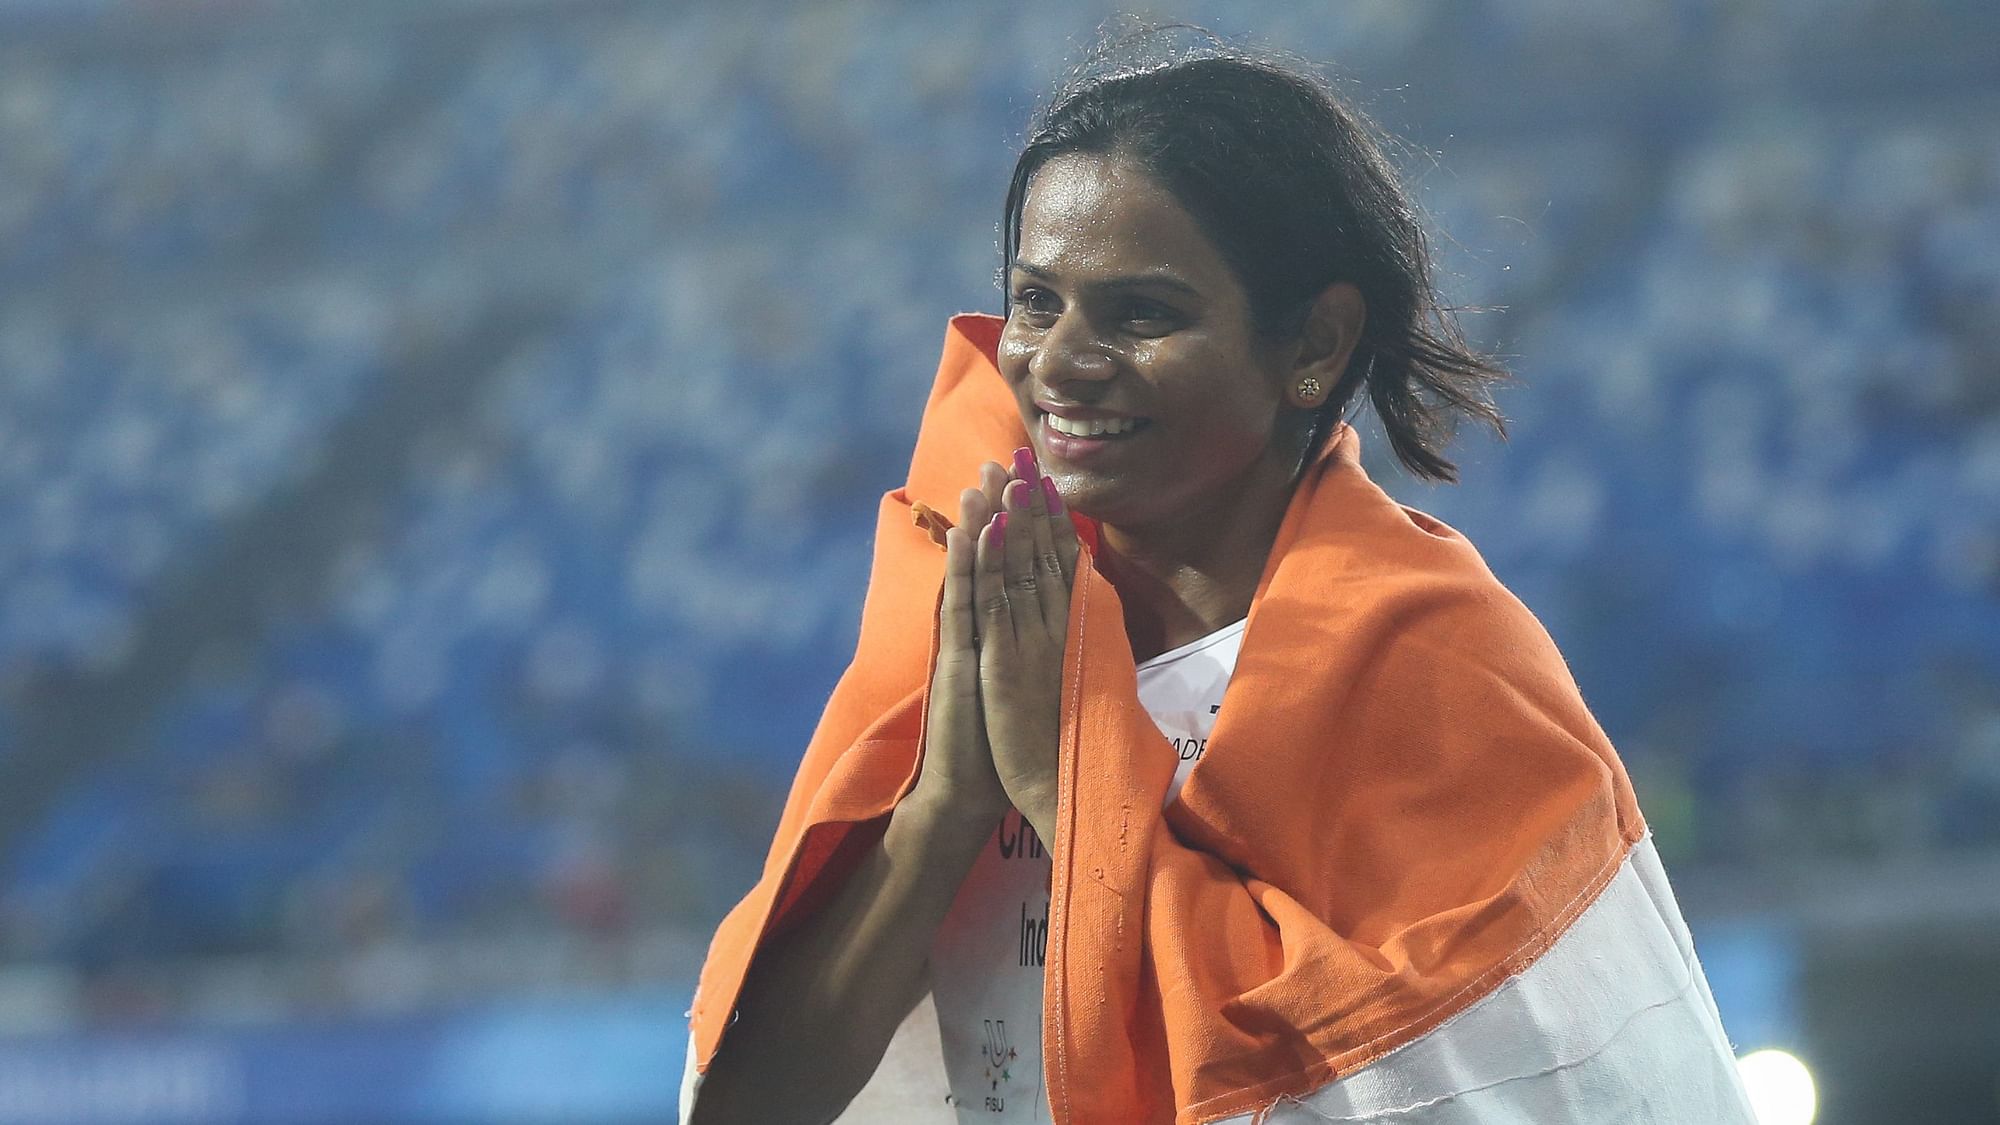 Indian sprinter Dutee Chand feels that the qualification mark for 2020 Tokyo Olympics in the 100m event is very difficult.